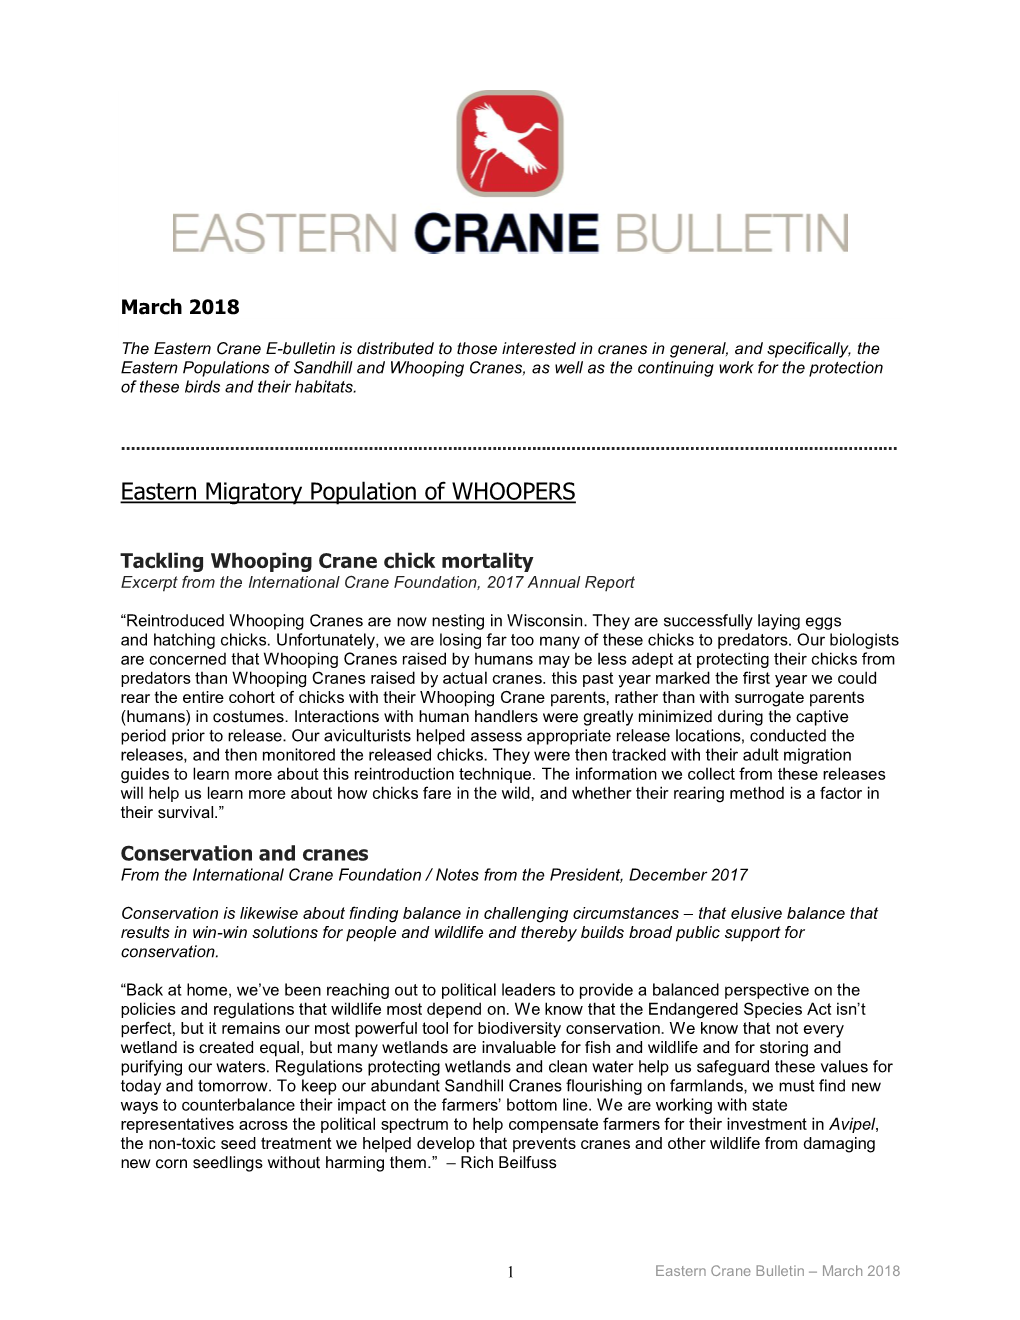 Eastern Crane Bulletin, March 2018 Issue, Pp.9-10